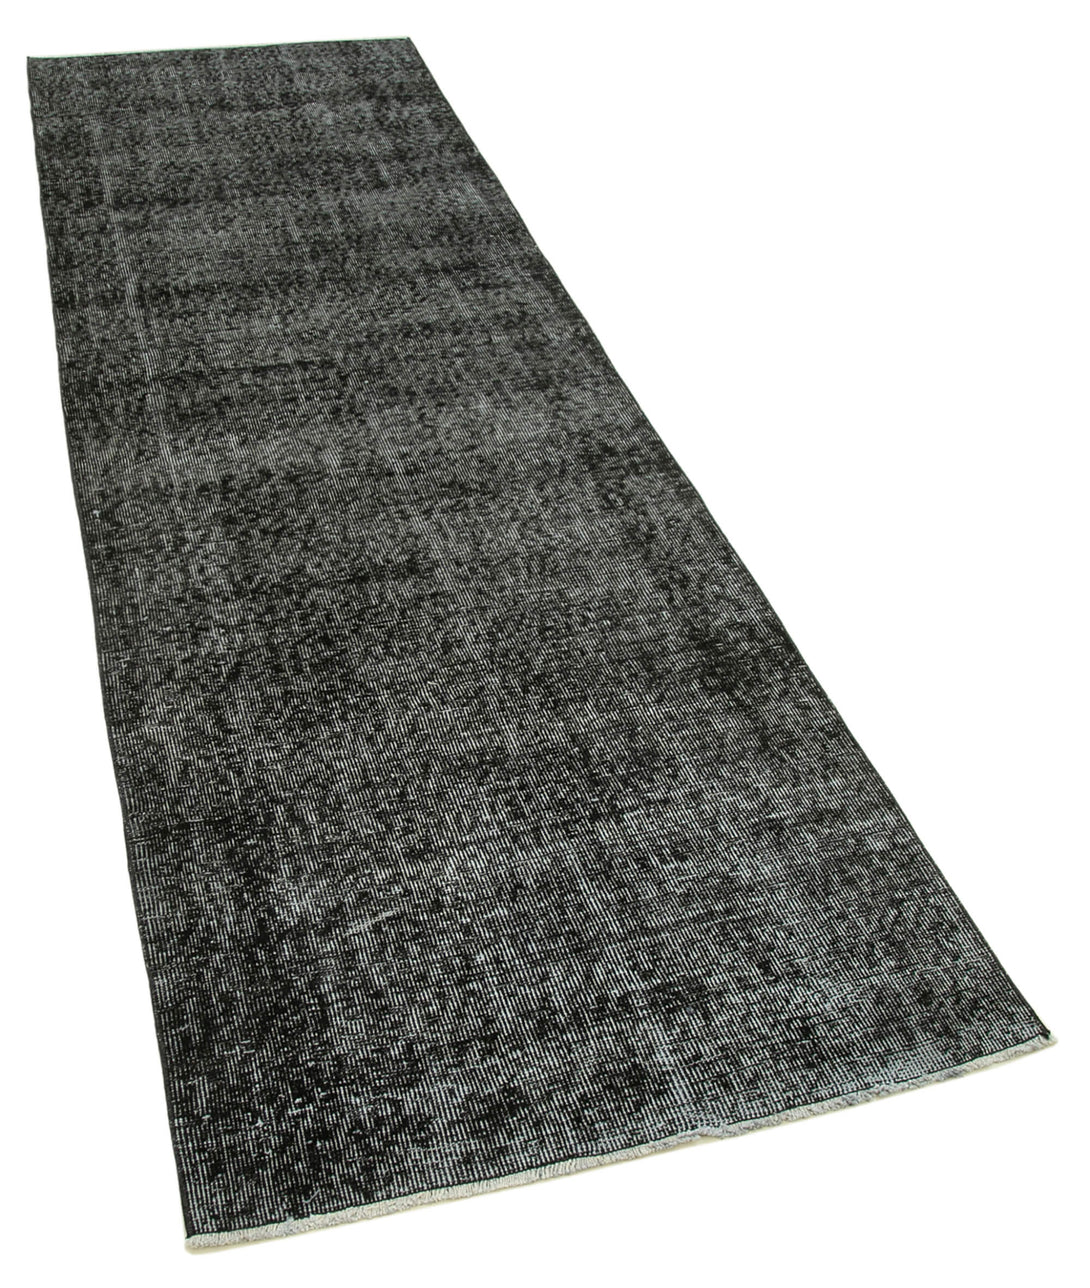 Handmade Overdyed Runner > Design# OL-AC-37086 > Size: 2'-11" x 9'-7", Carpet Culture Rugs, Handmade Rugs, NYC Rugs, New Rugs, Shop Rugs, Rug Store, Outlet Rugs, SoHo Rugs, Rugs in USA